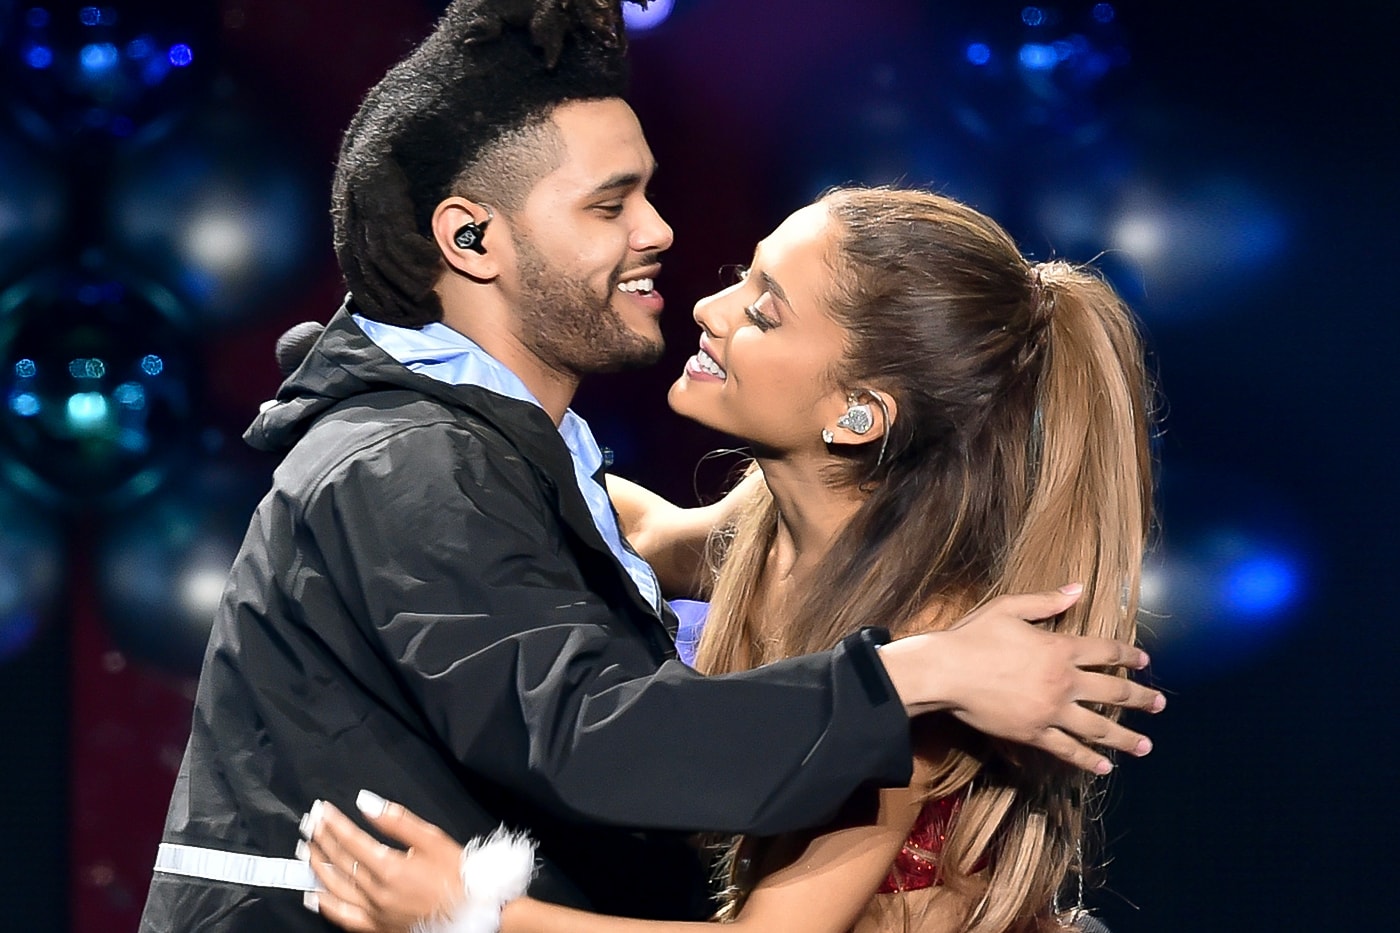 The Weeknd Ariana Grande Save Your Tears Second Longest Running No 1 blinding lights after hours